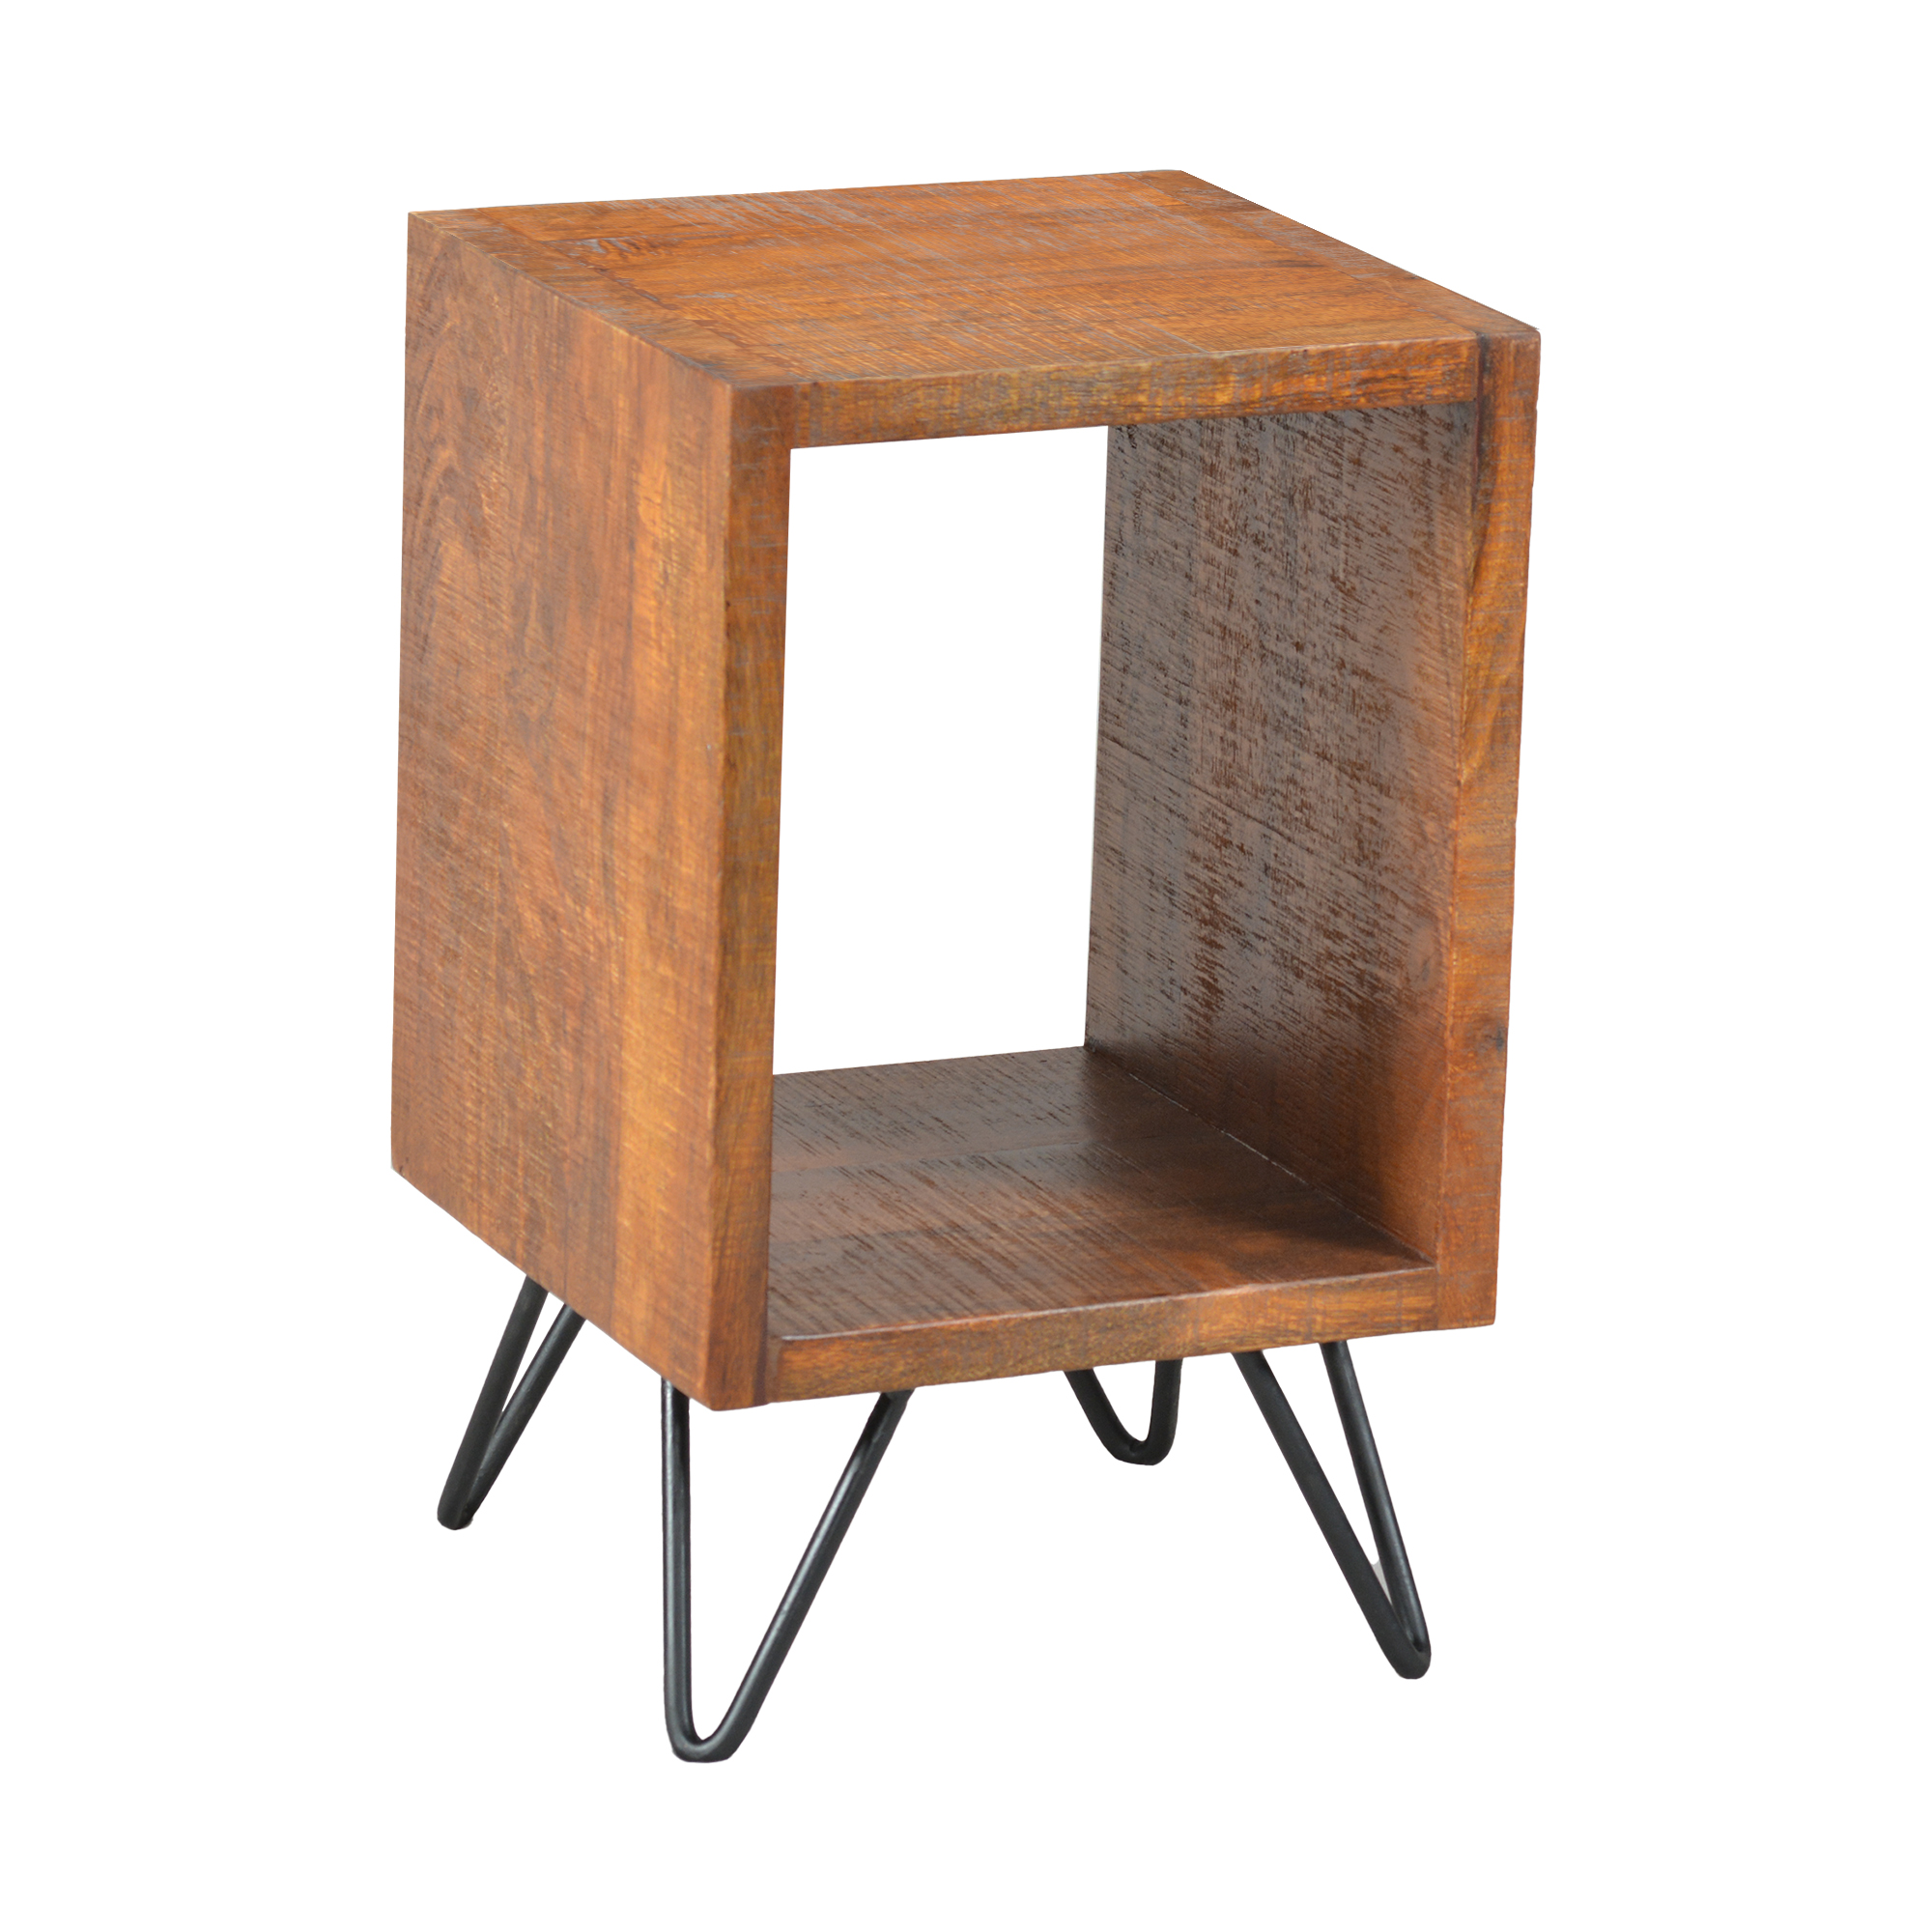 22 Inch Textured Cube Shape Wooden Nightstand with Angular Legs, Brown and Black